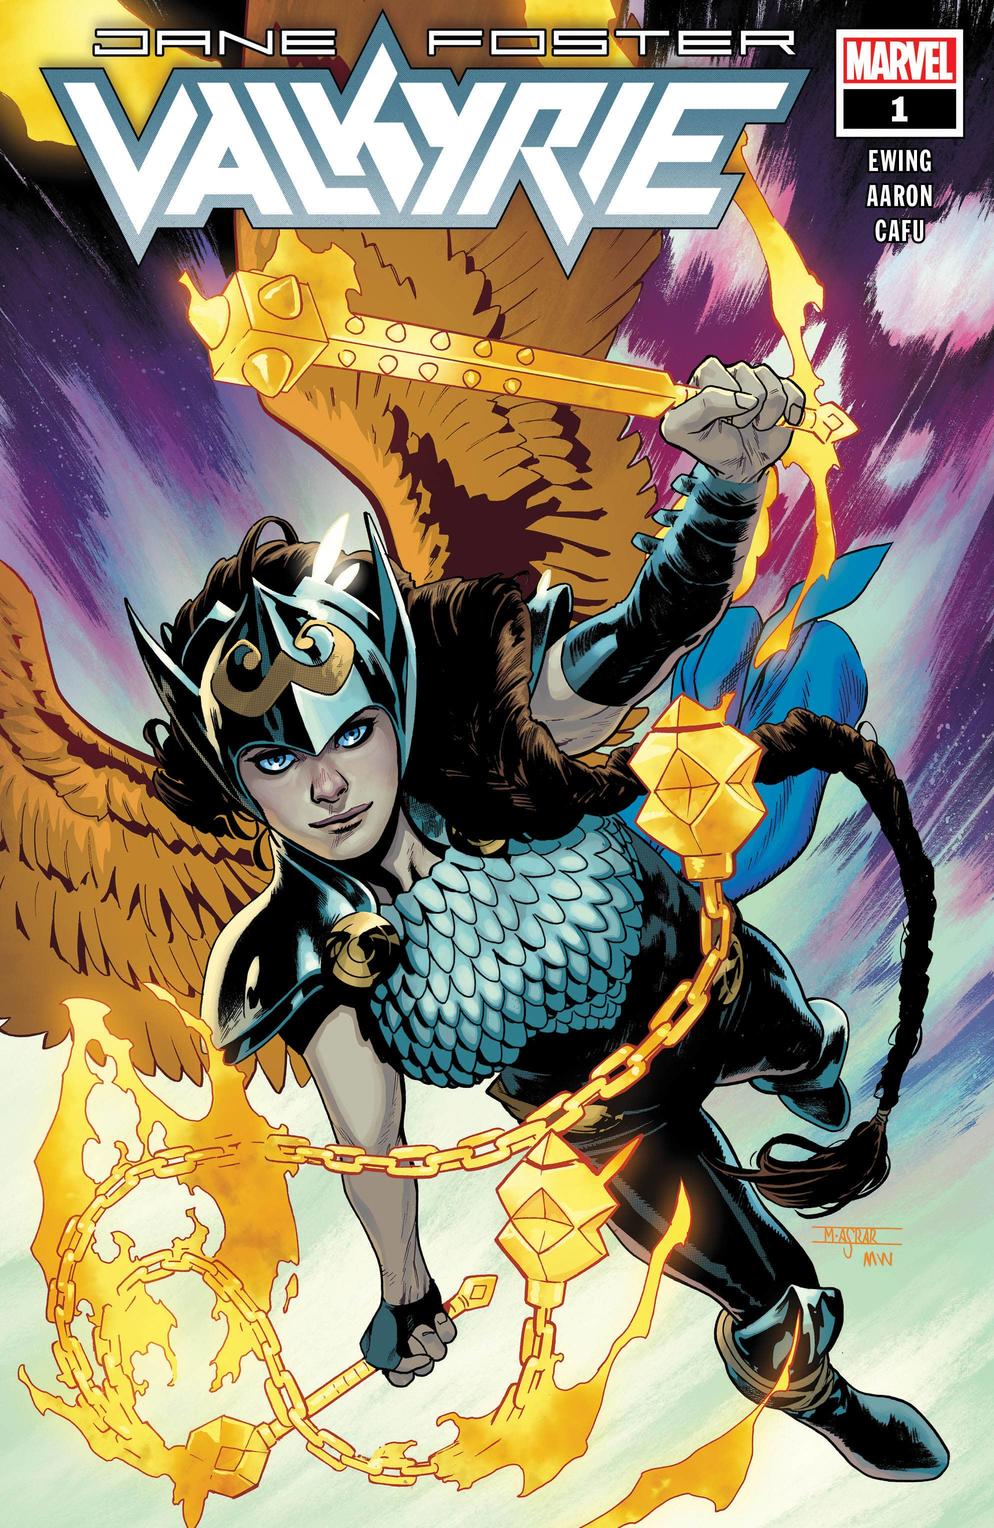 Jane Foster Becomes A Valkyrie And Weilds An All Powerful Weapon in Valkyrie #1